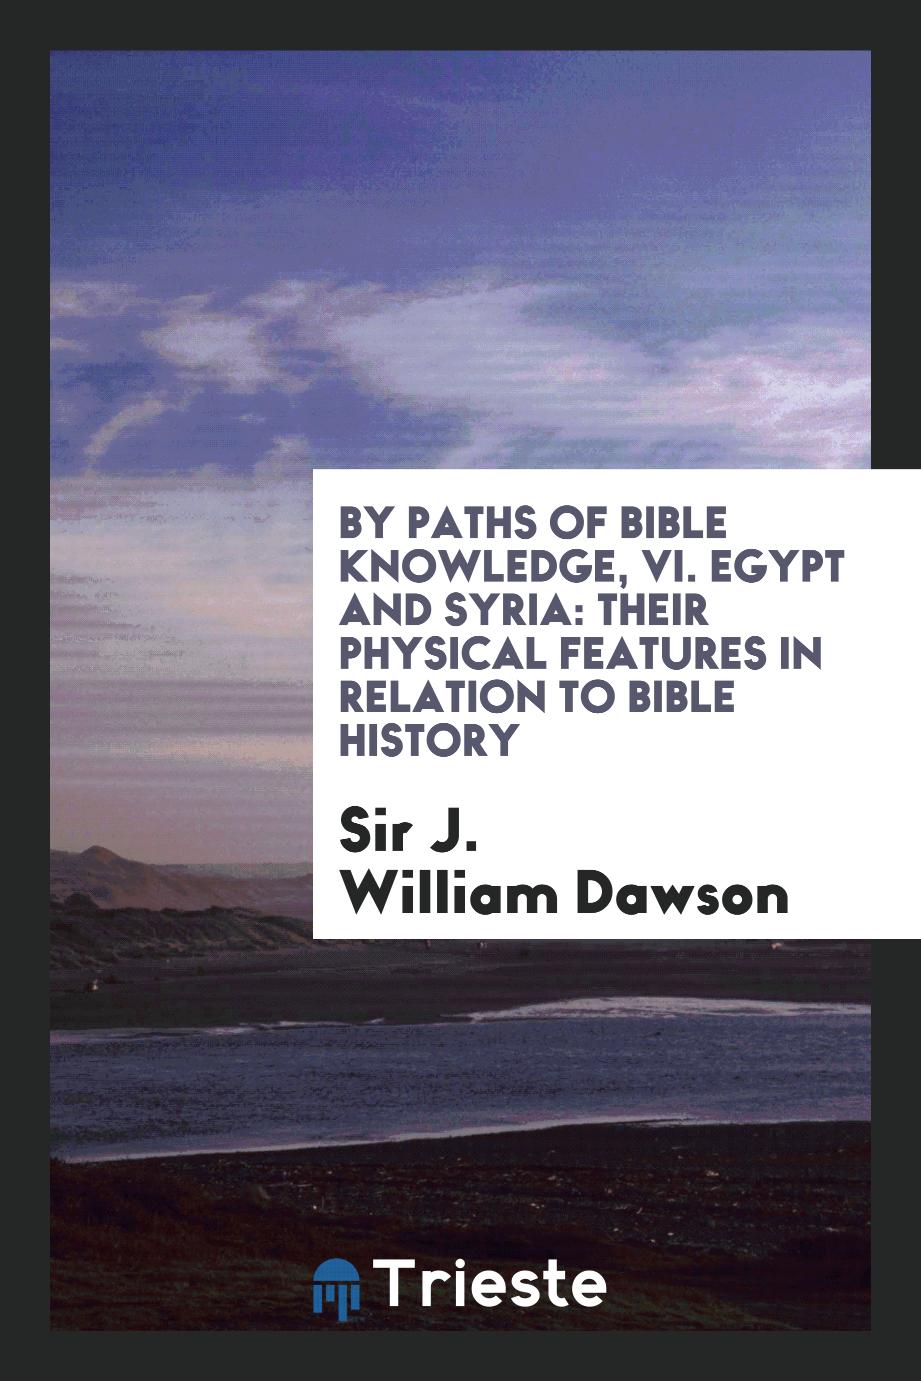 By paths of Bible Knowledge, VI. Egypt and Syria: their physical features in relation to Bible history